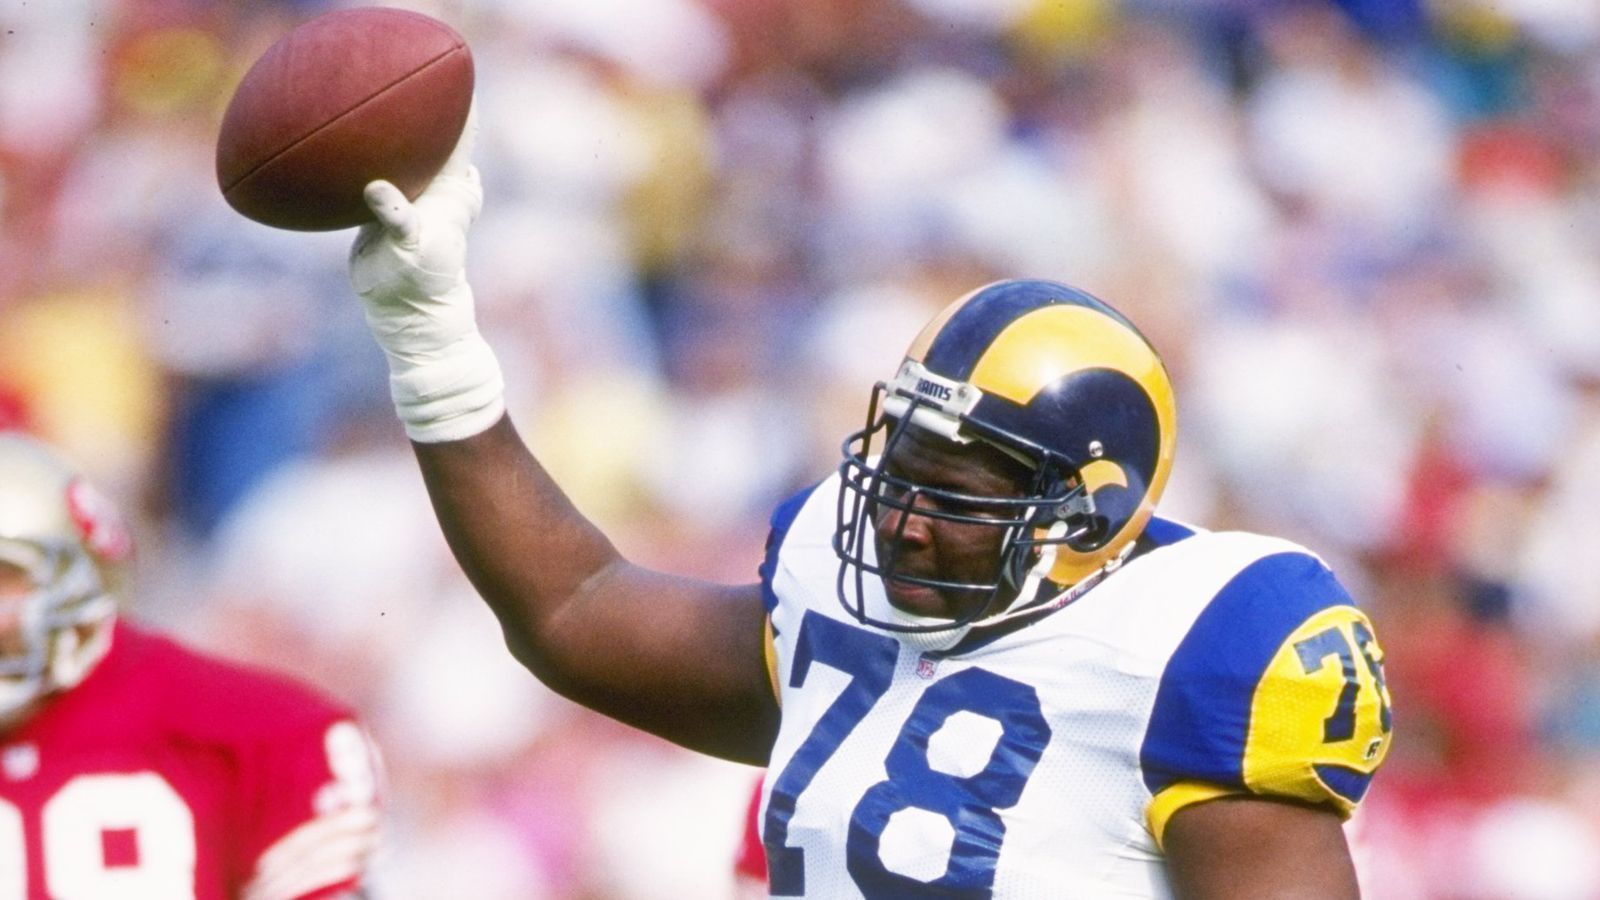 
                <strong>Jackie Slater (Offensive Tackle) - 20 Saisons</strong><br>
                Erste Saison: 1976Letzte Saison: 1995In der NFL aktiv für: Los Angeles/St. Louis Rams
              